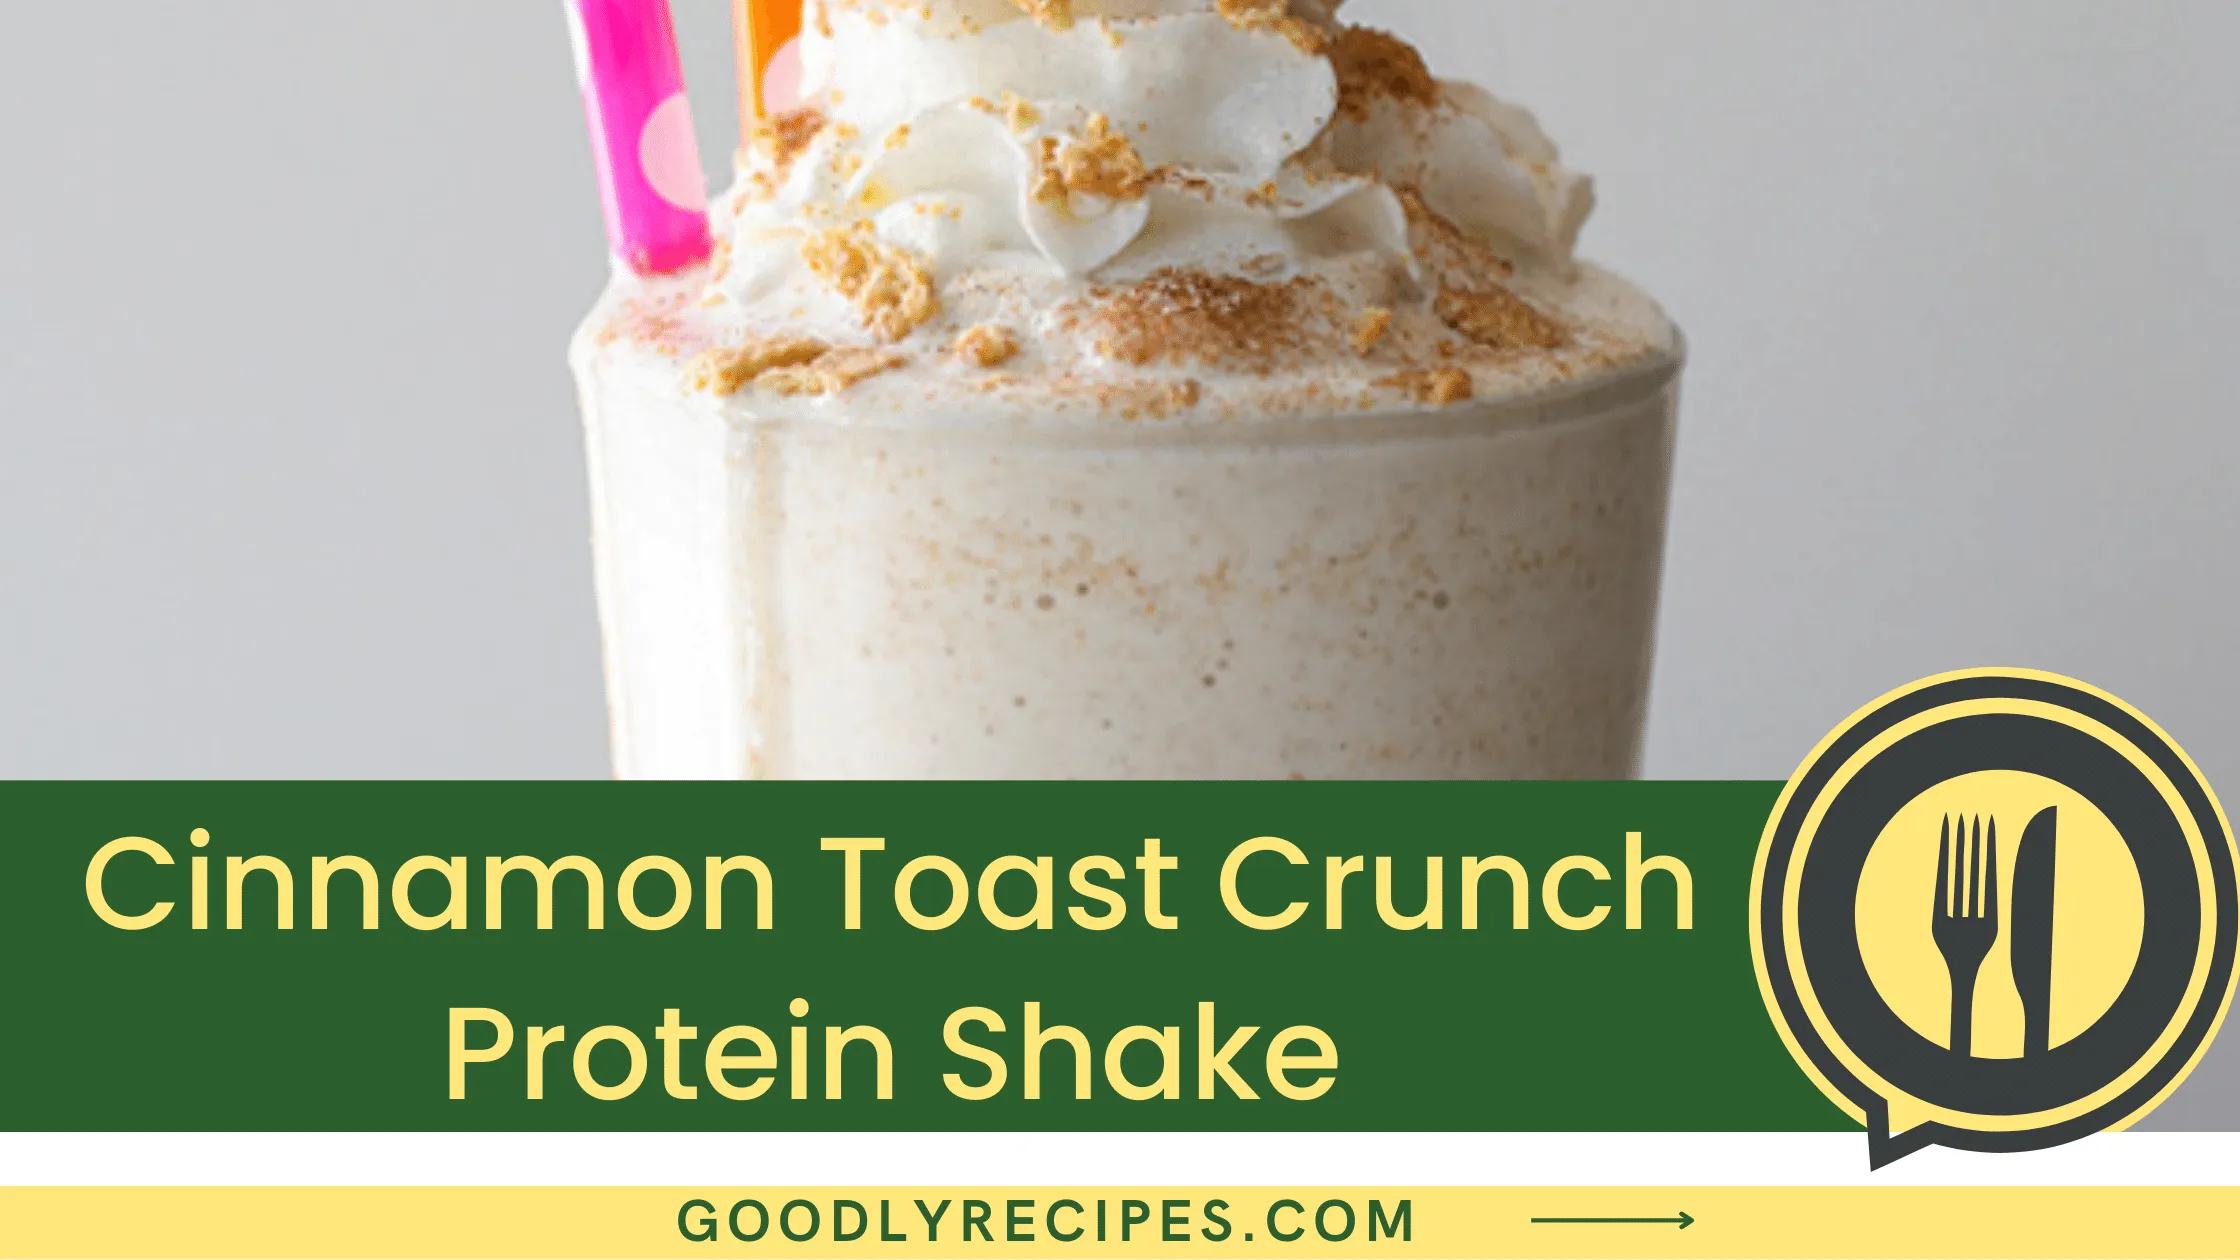 What is Cinnamon Toast Crunch Protein Shake?